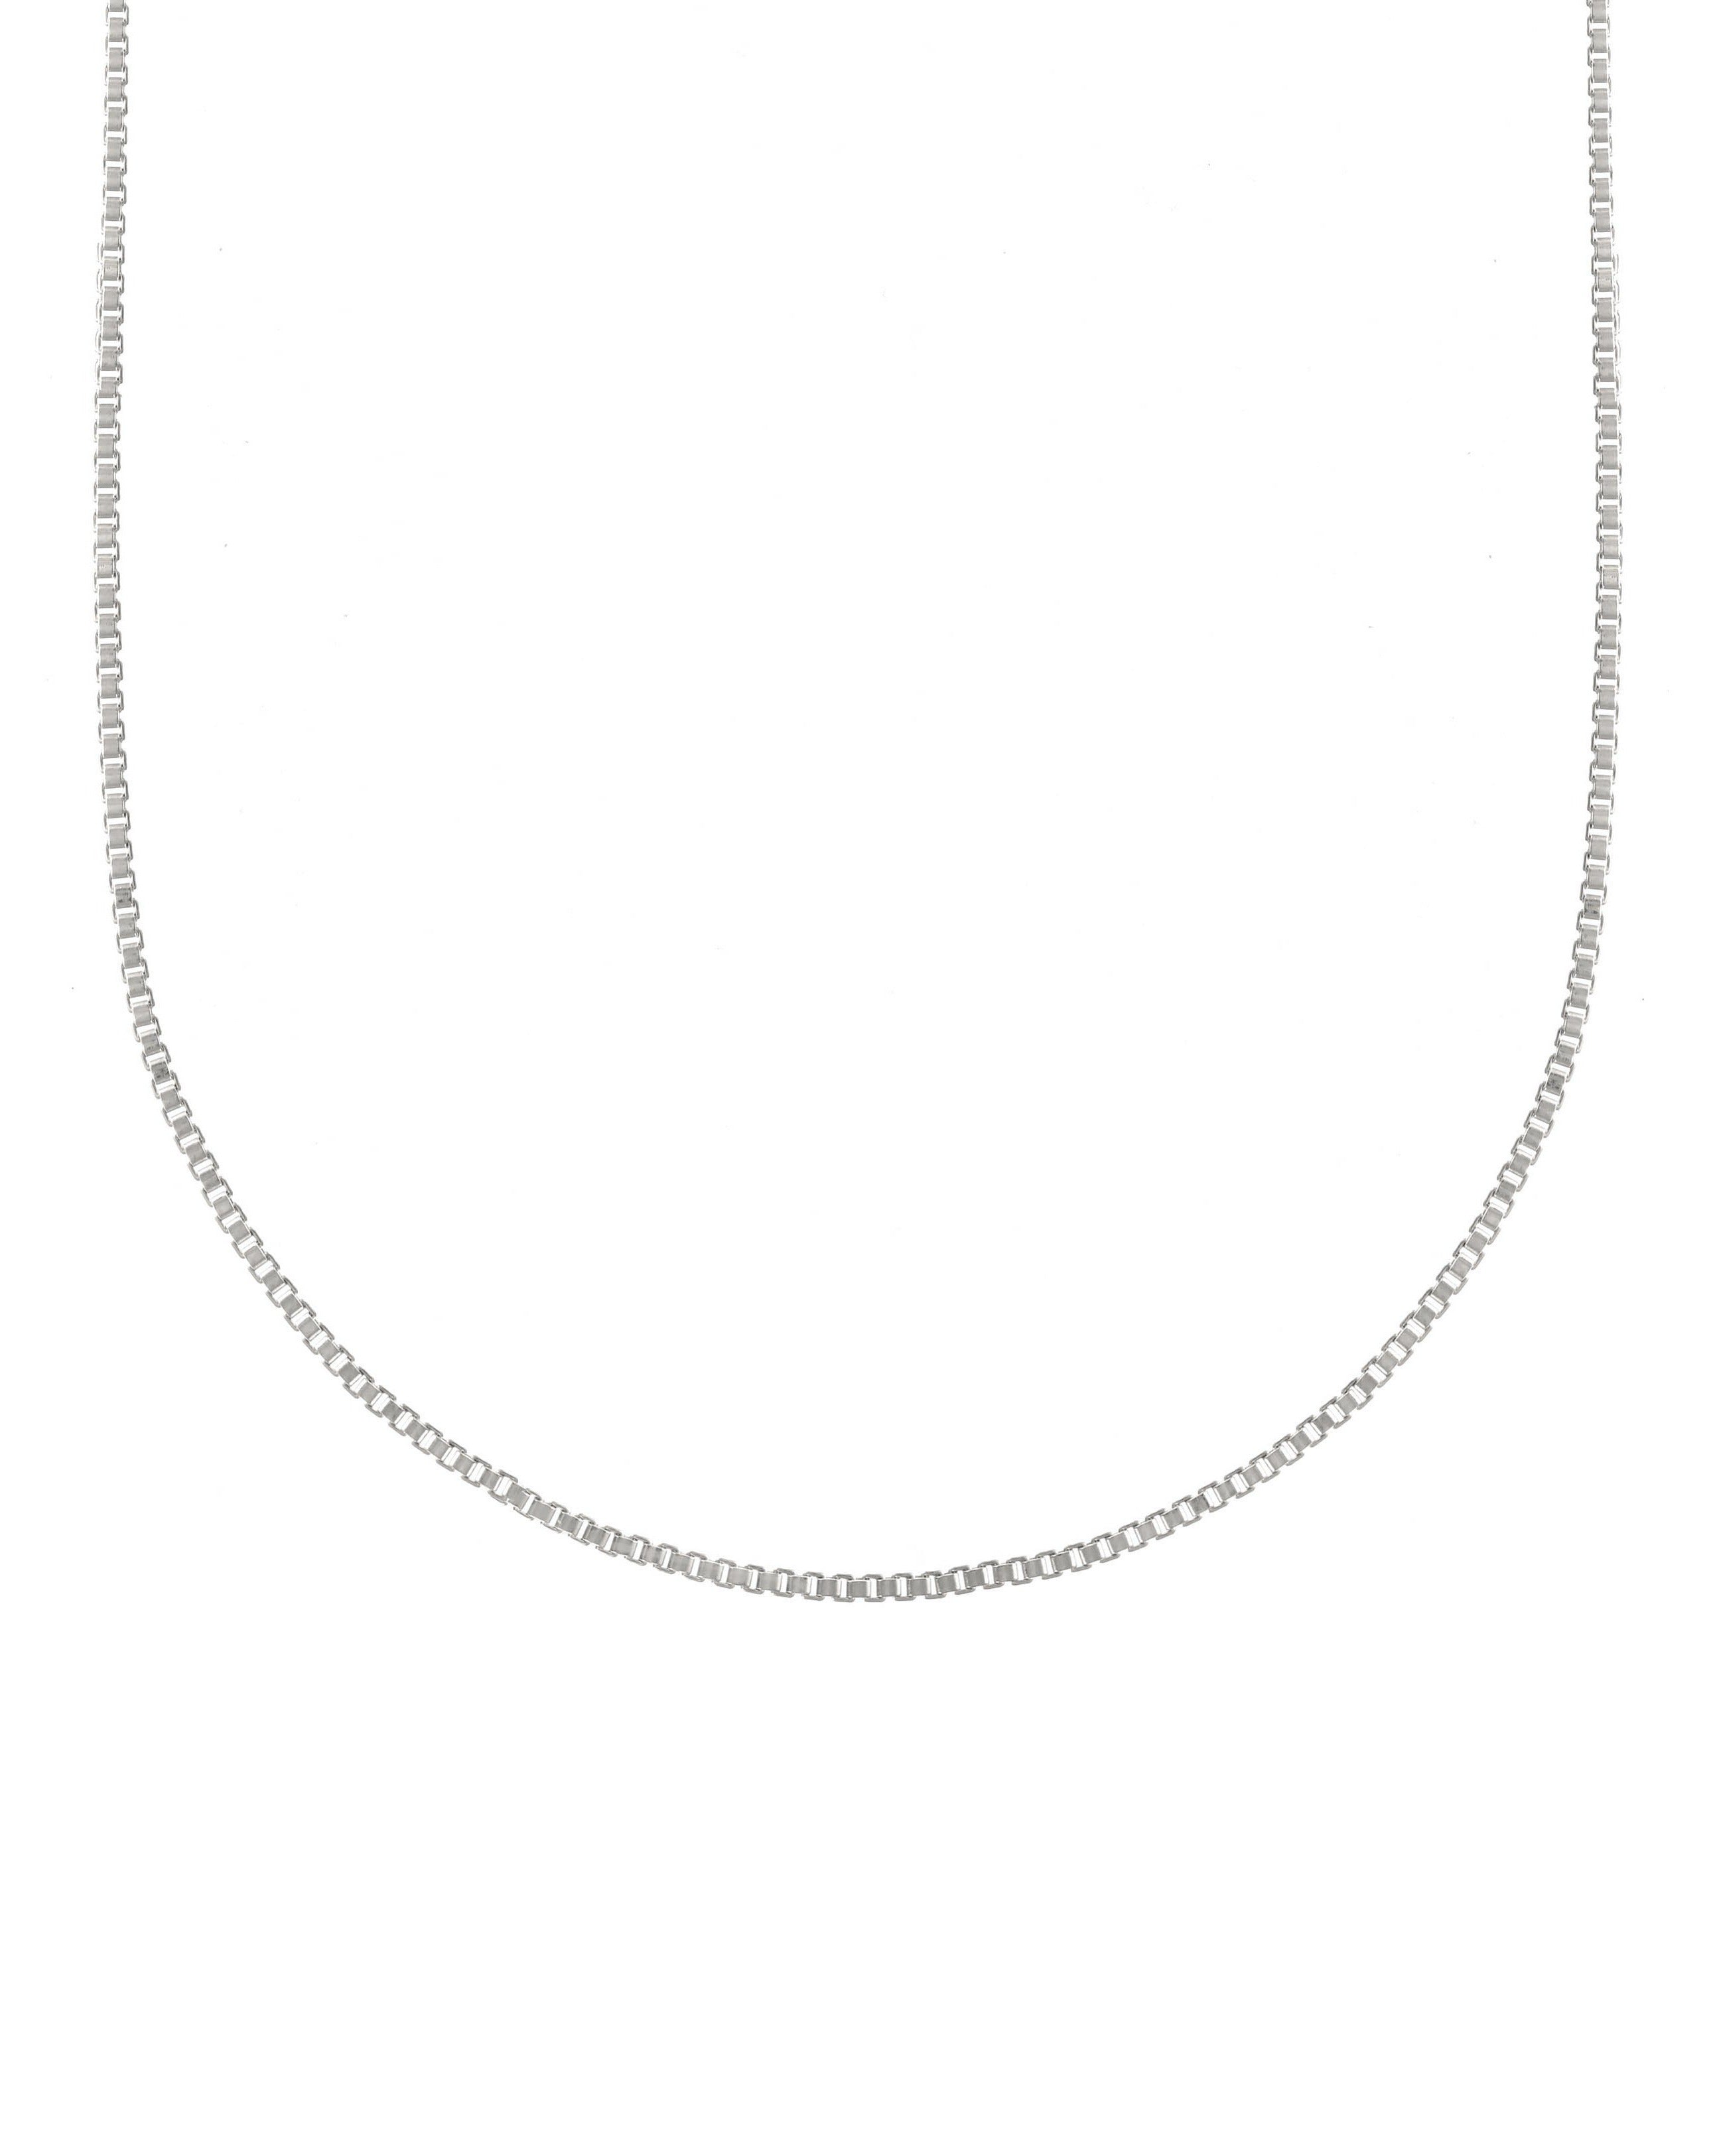 Jova Necklace by KOZAKH. A 14 to 16 inch adjustable length, 5mm Box chain necklace in Sterling Silver.